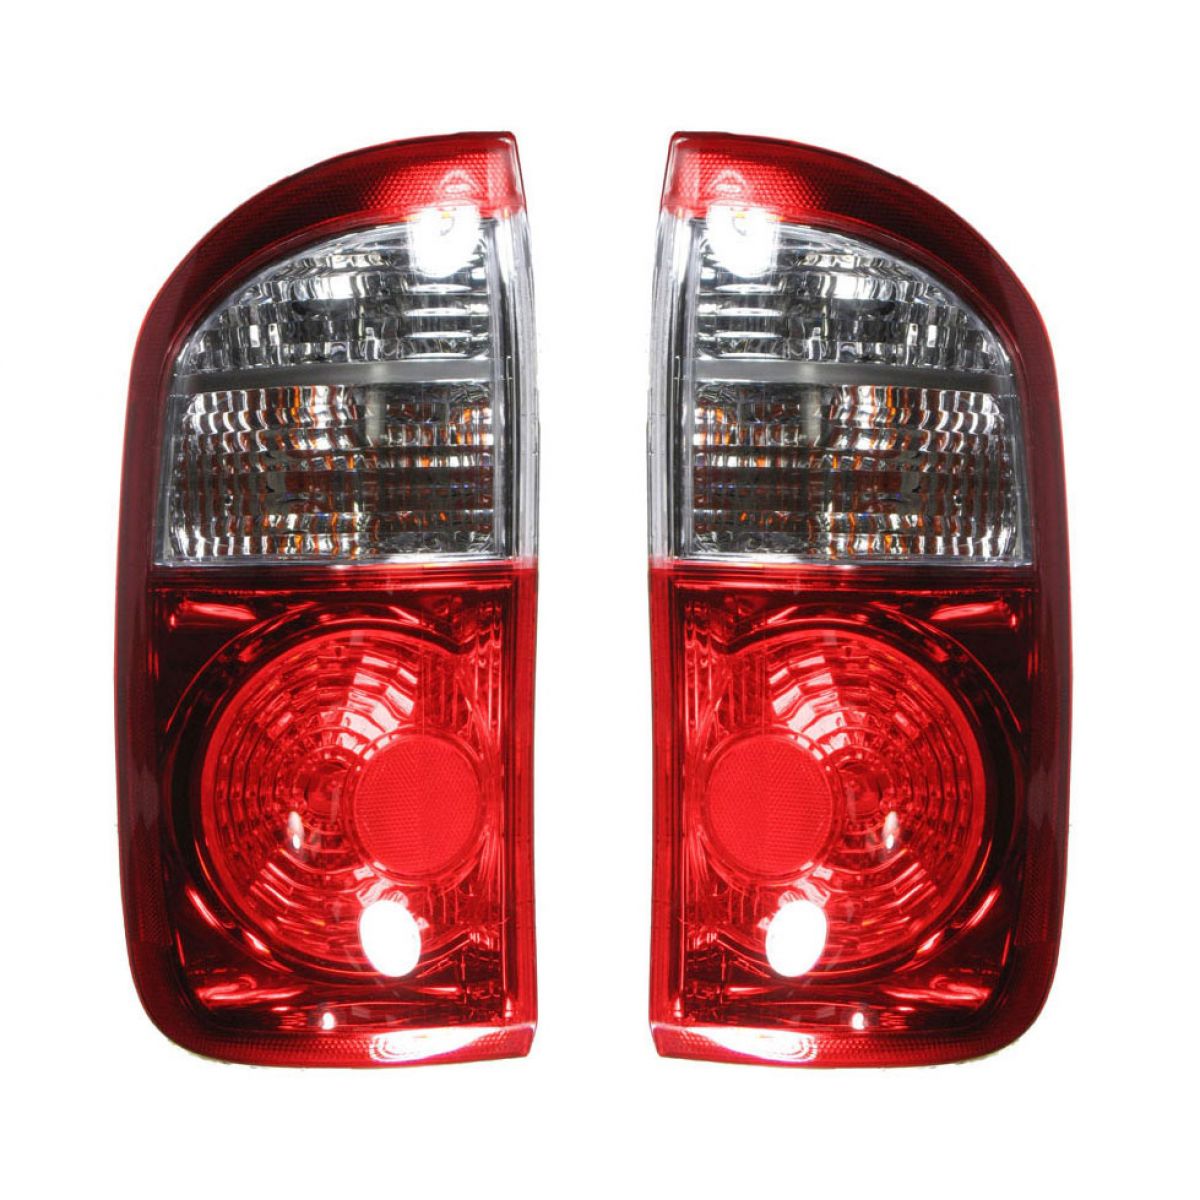 Taillights Taillamp Pair Set for 04-06 Tundra 4 Door Double Cab Pickup